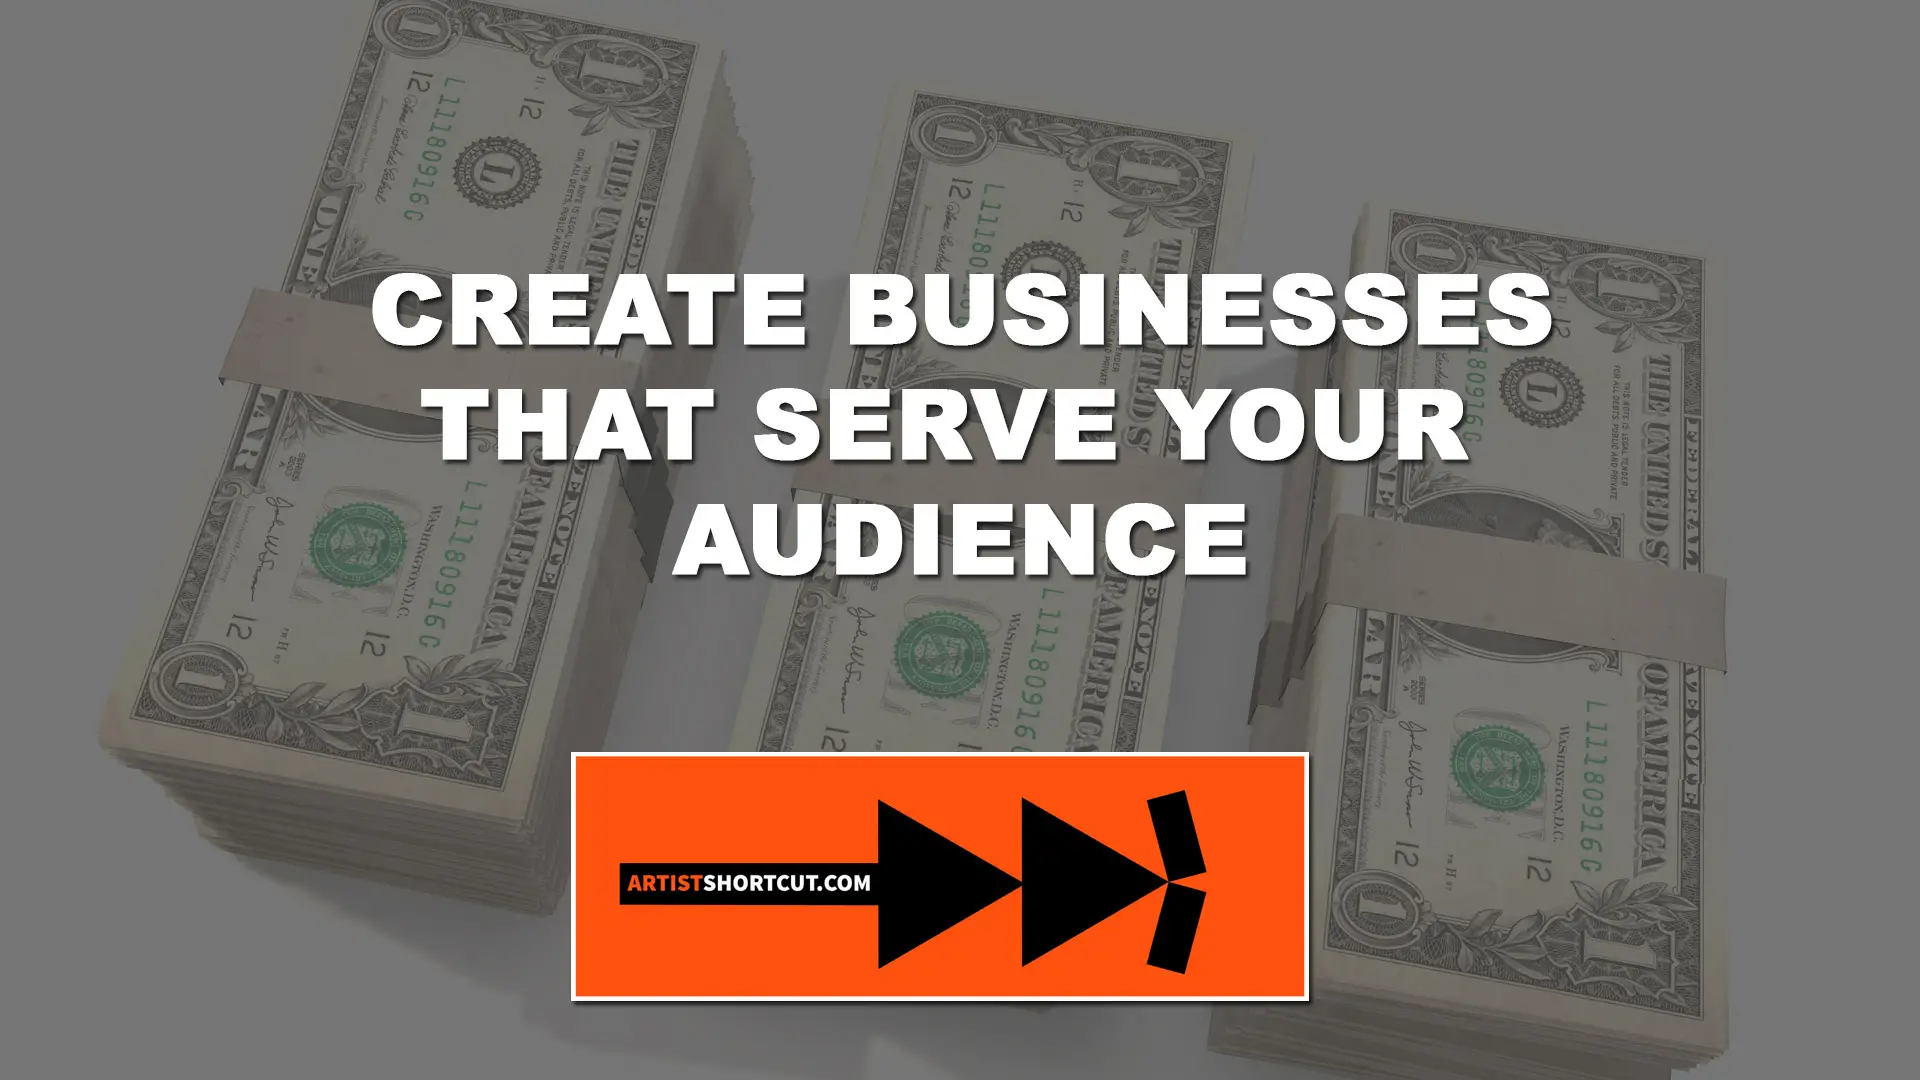 Create businesses that serve your audience